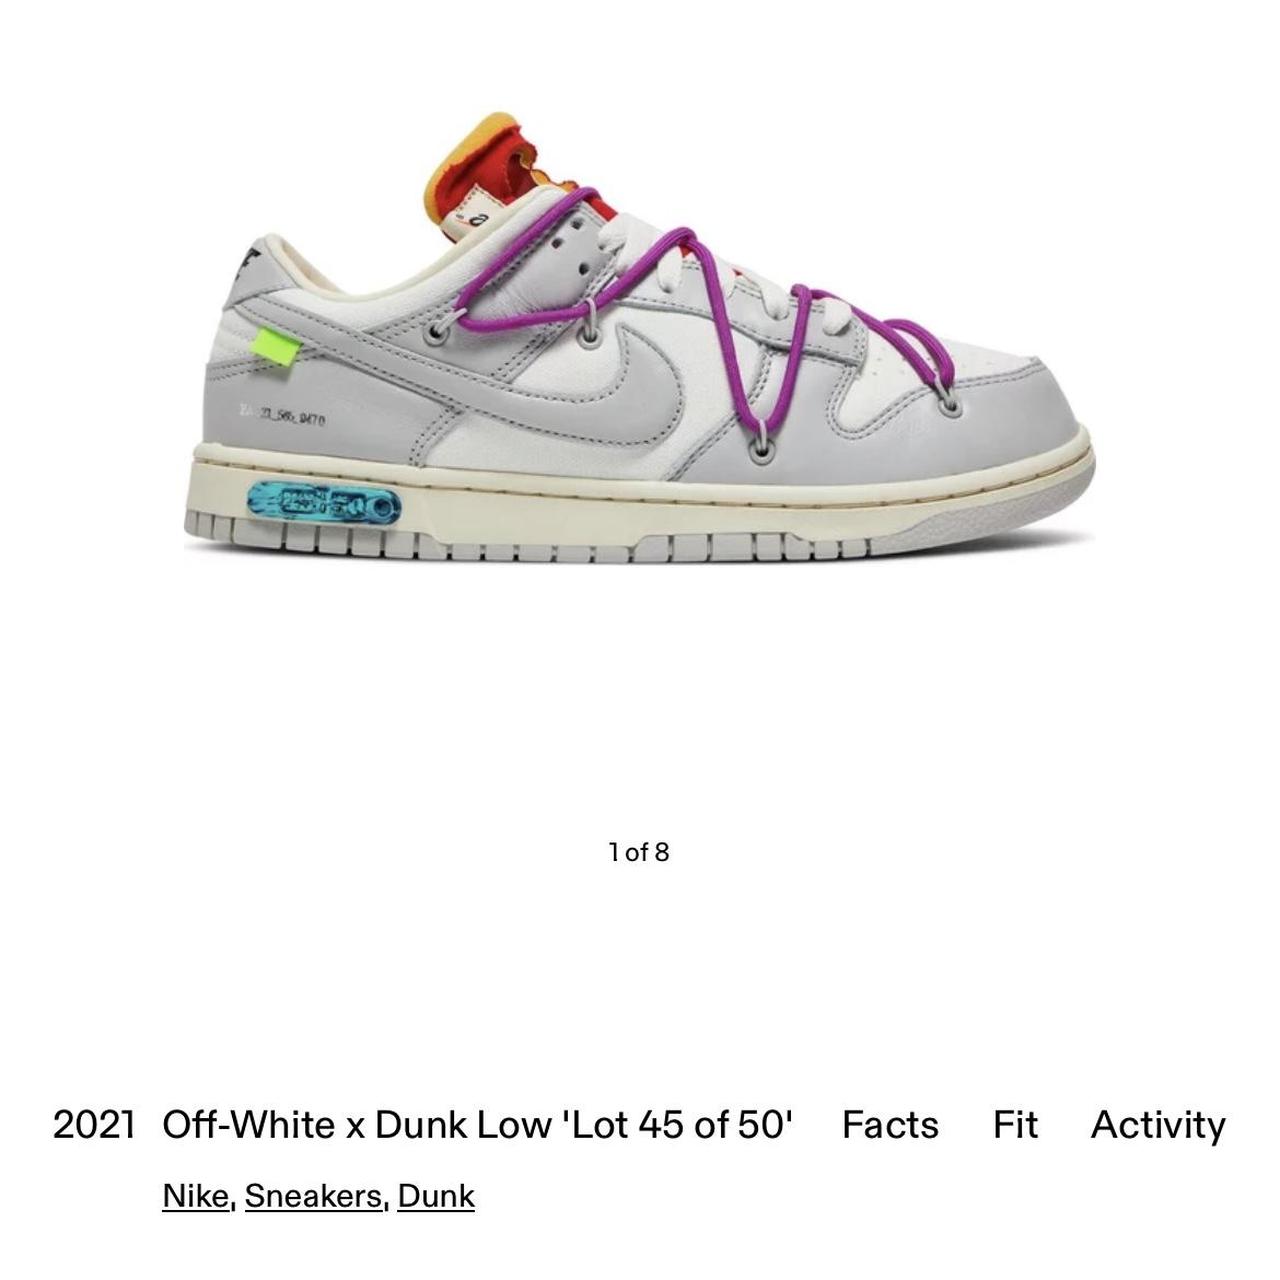 Nike off-white x dunk low “lot 45 of 50” mens size... - Depop